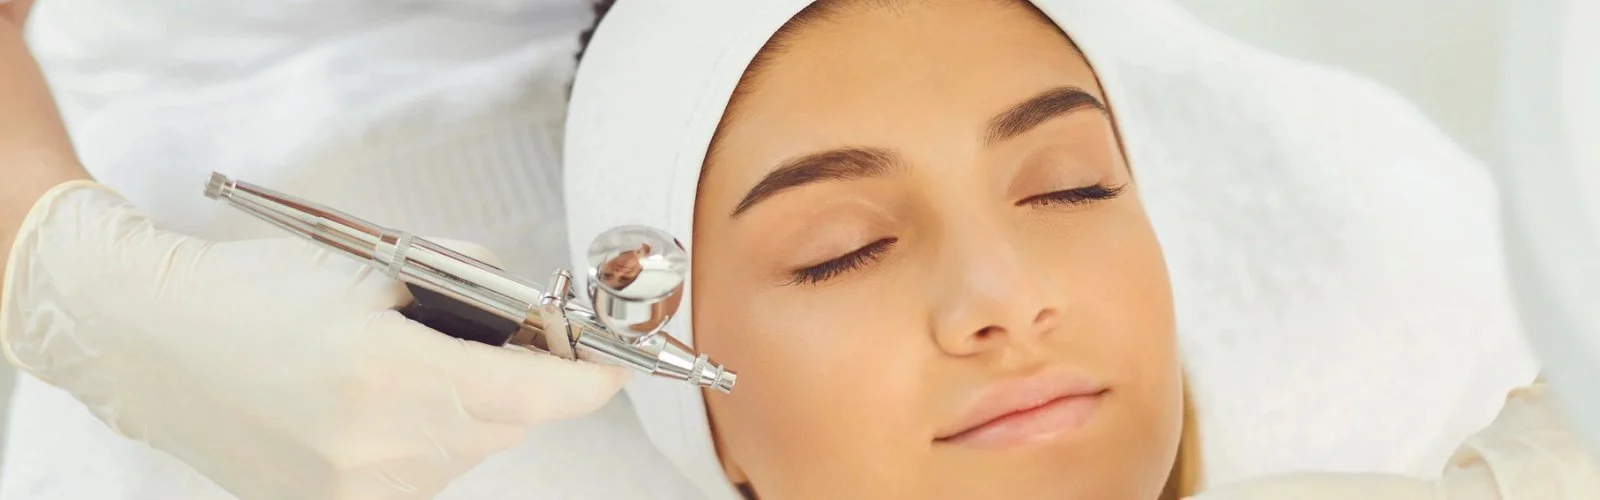 7 Tips on How to Care for Your Skin After A Chemical Peel